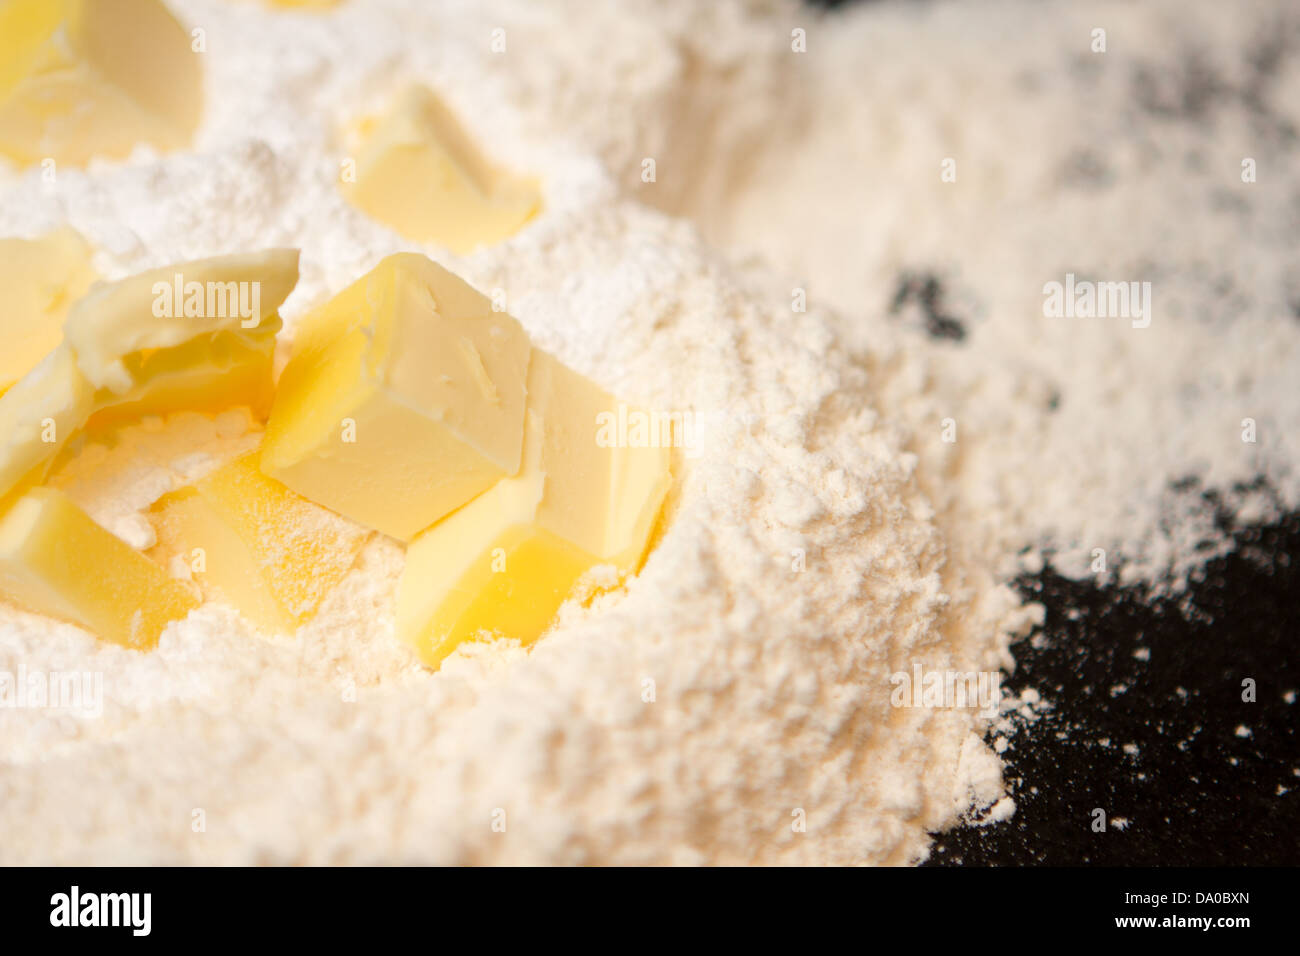 Detail of flour, butter and icing sugar ready for making a pastry Stock Photo